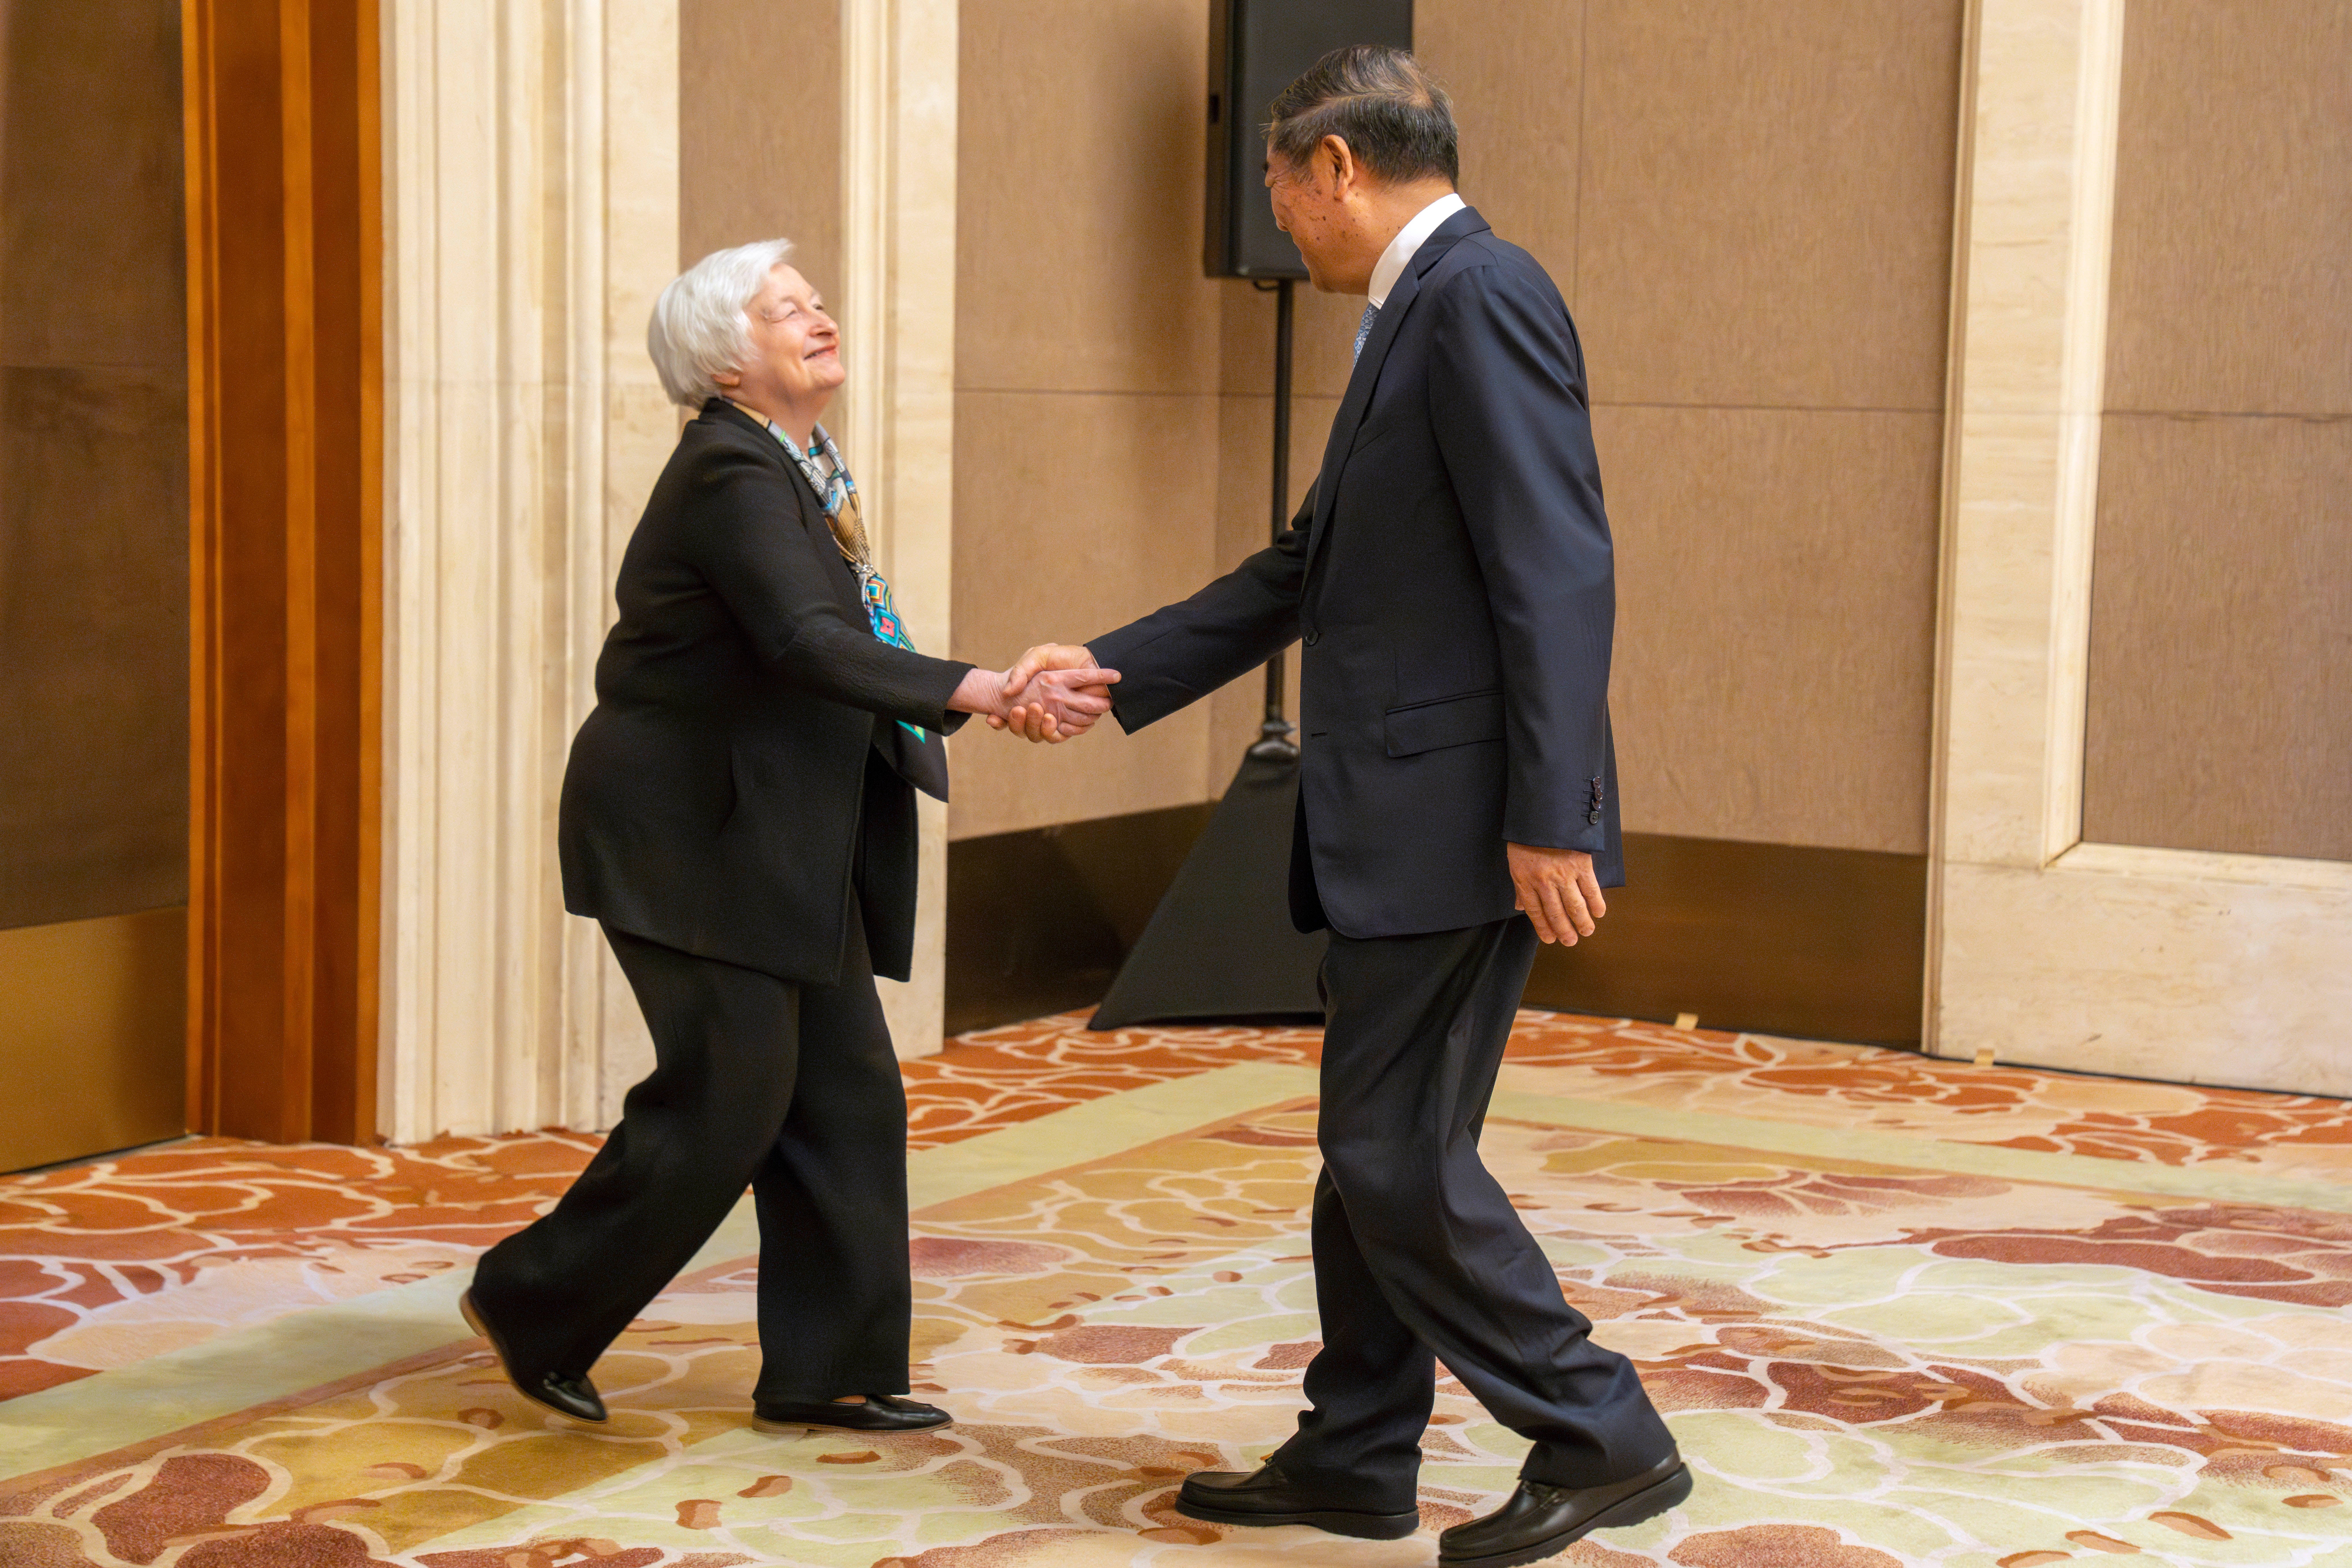 Ms Yellen said the US would continue to communicate directly its concerns to China